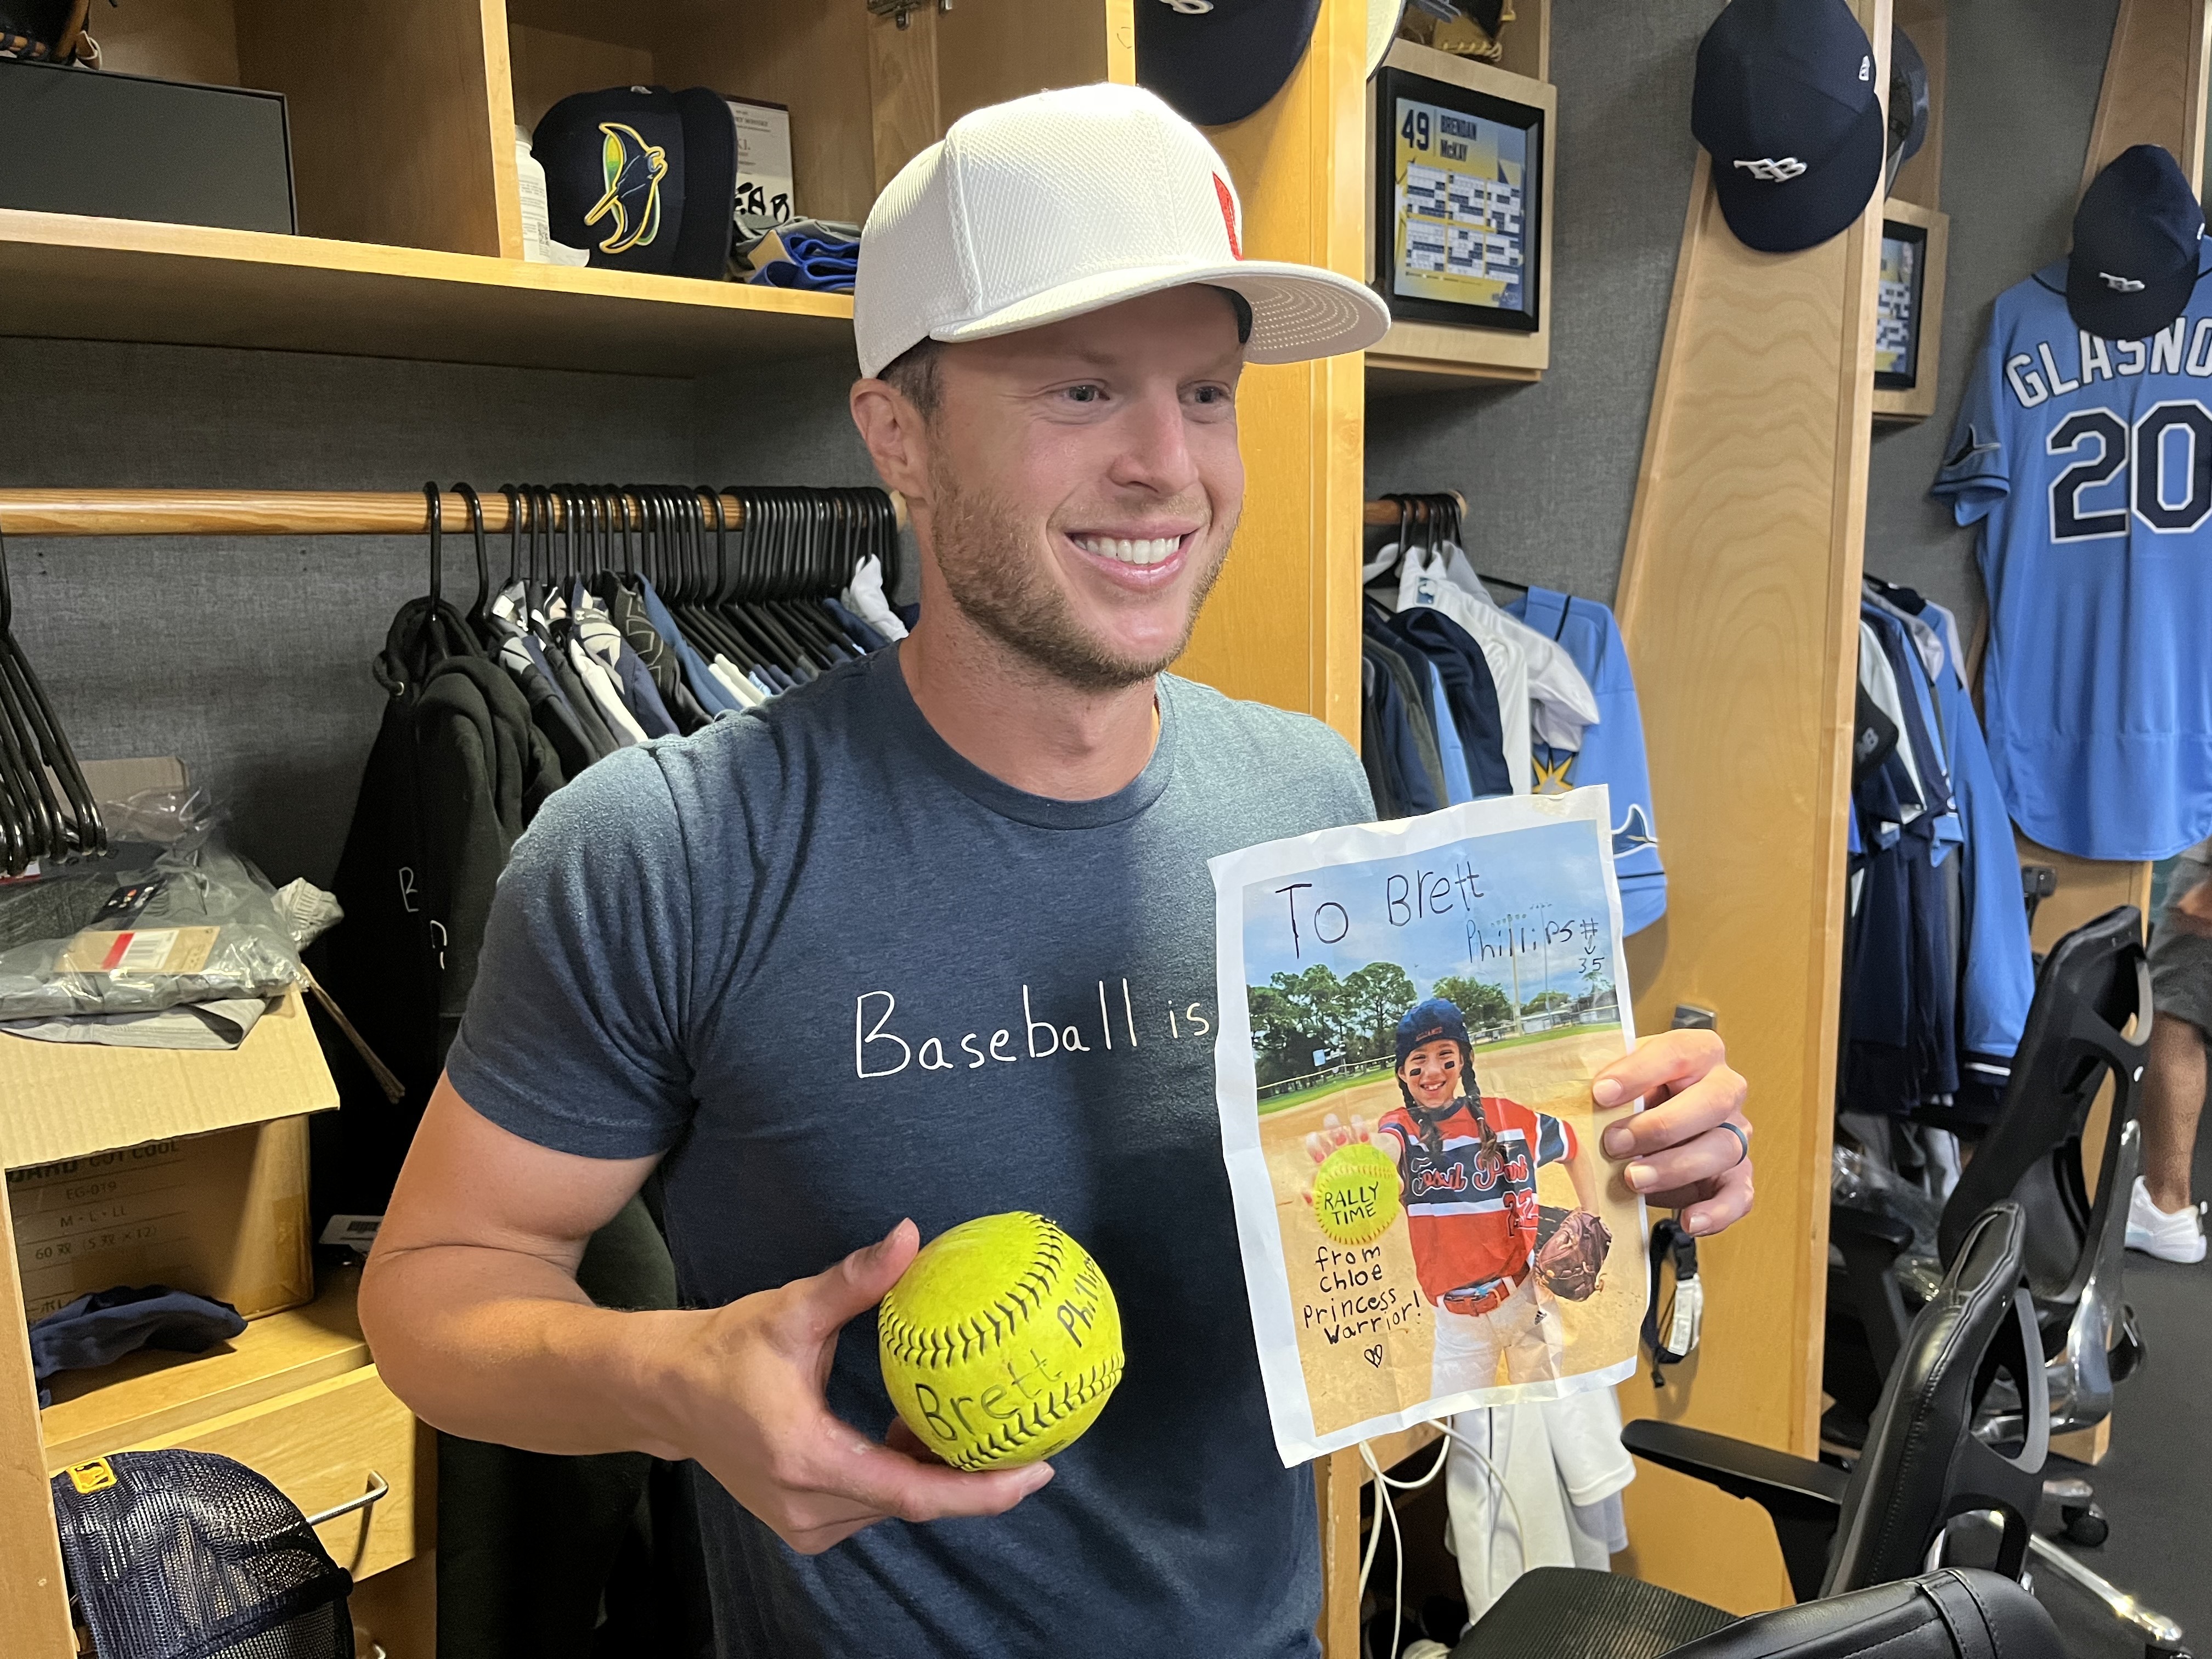 Inspired By Young Cancer Patient, Rays' Brett Phillips Launches